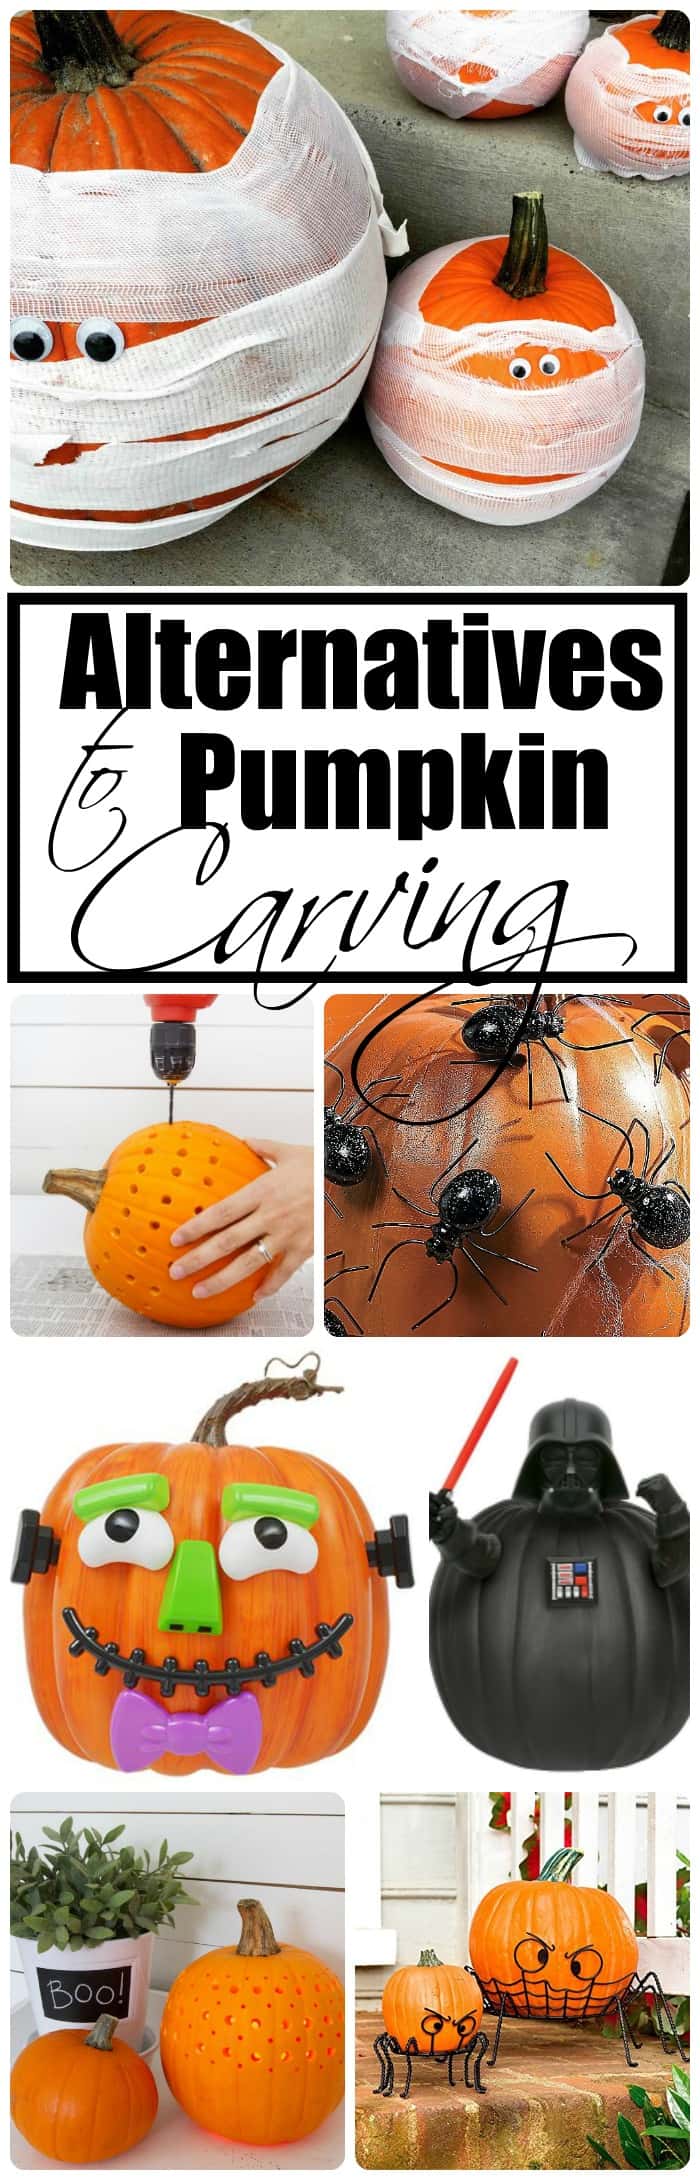 Try some of these ideas instead of the traditional pumpkin carving!